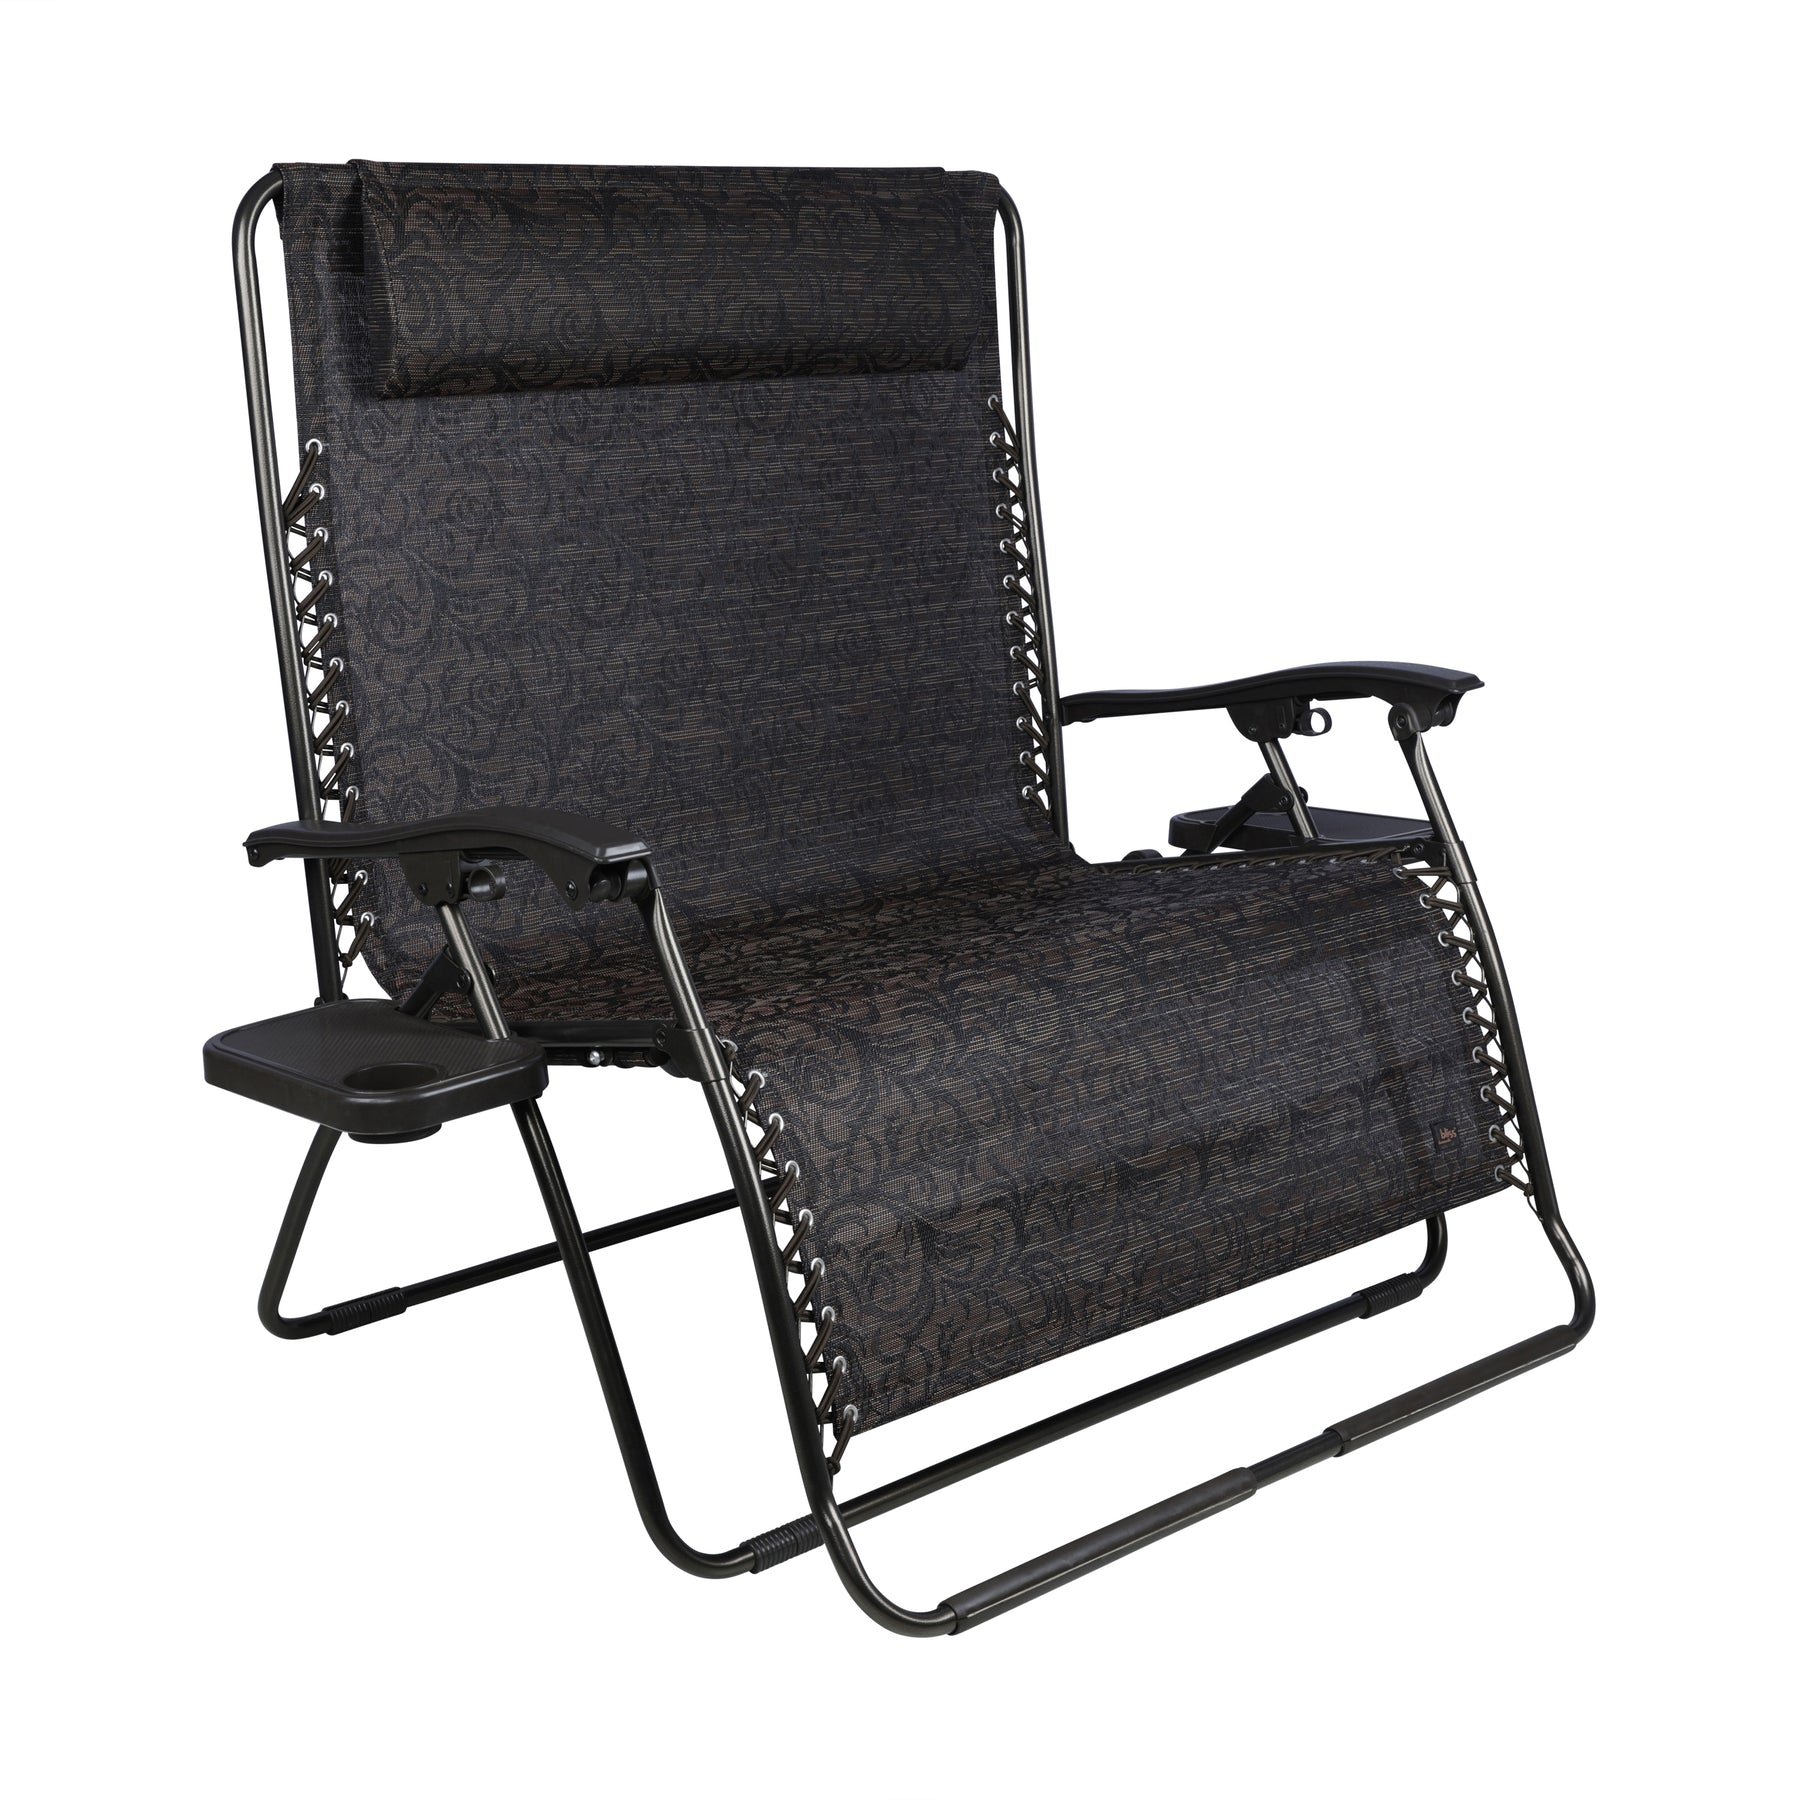 Bliss Hammocks 45-inch Wide 2-Person Zero Gravity Chair with Pillow and Drink Tray in the brown jacquard variation.